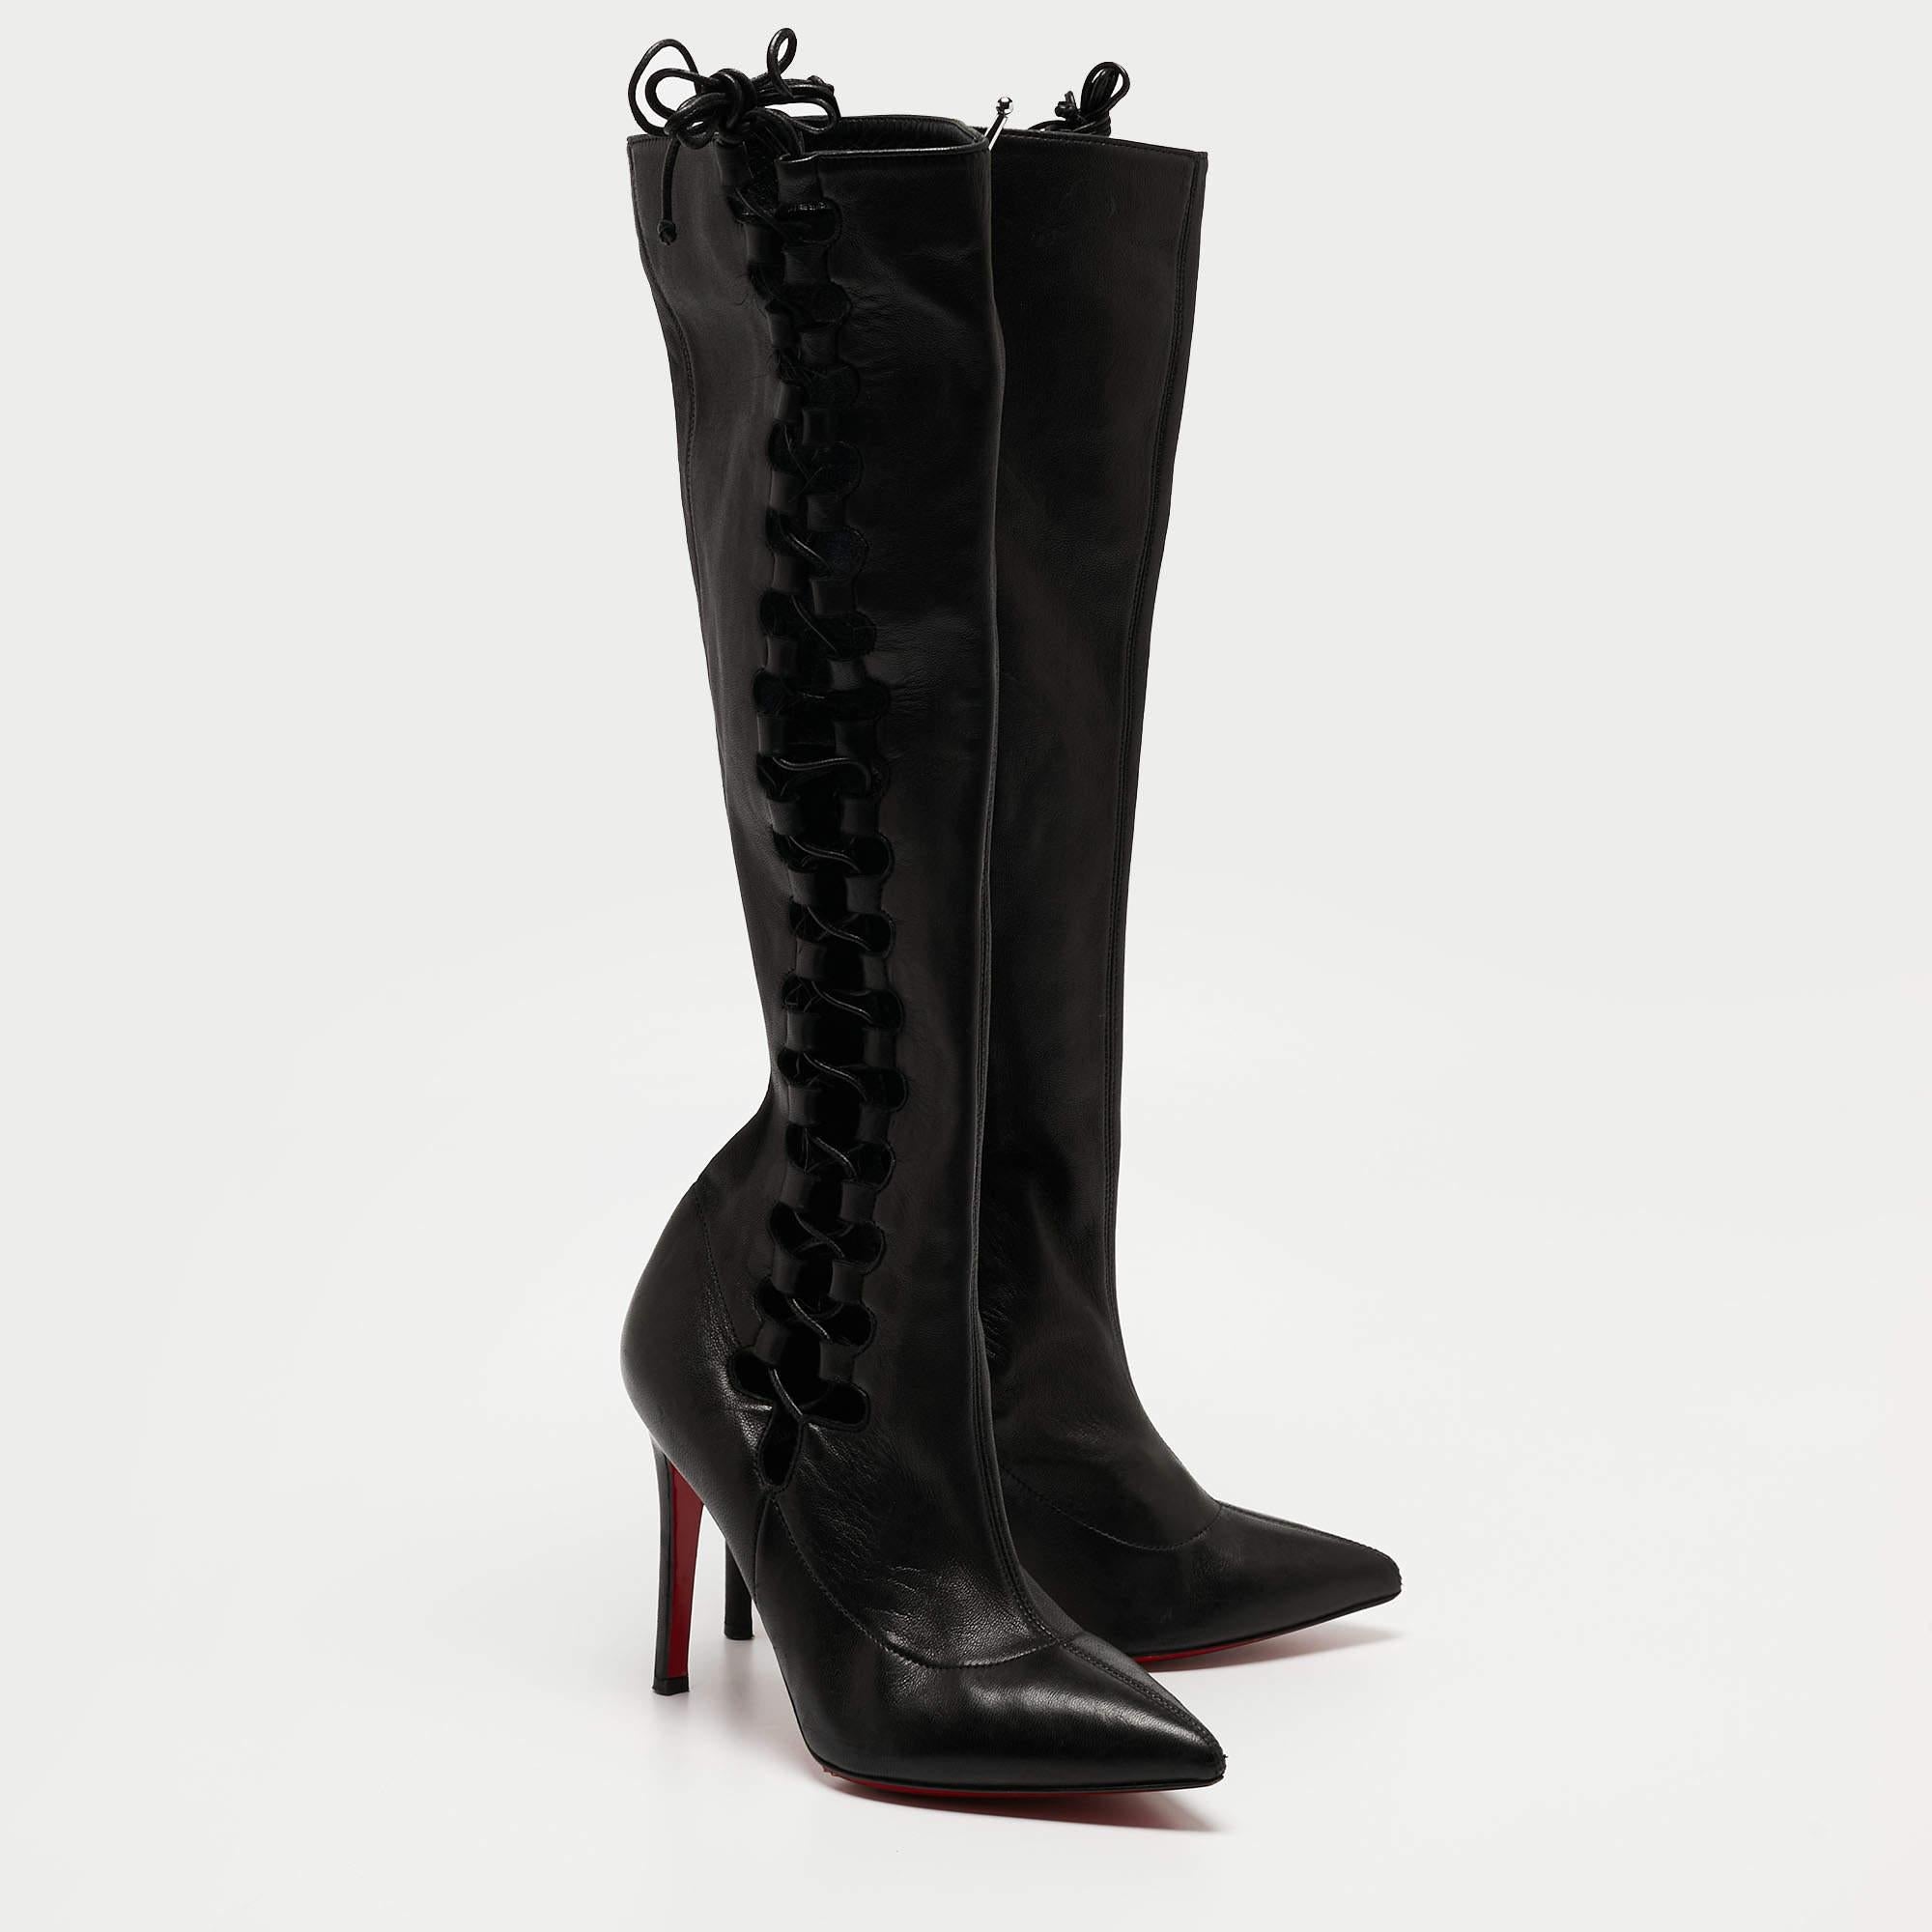 Christian Louboutin Black Leather Sempre Knee Length Boots Size 37 For Sale 4